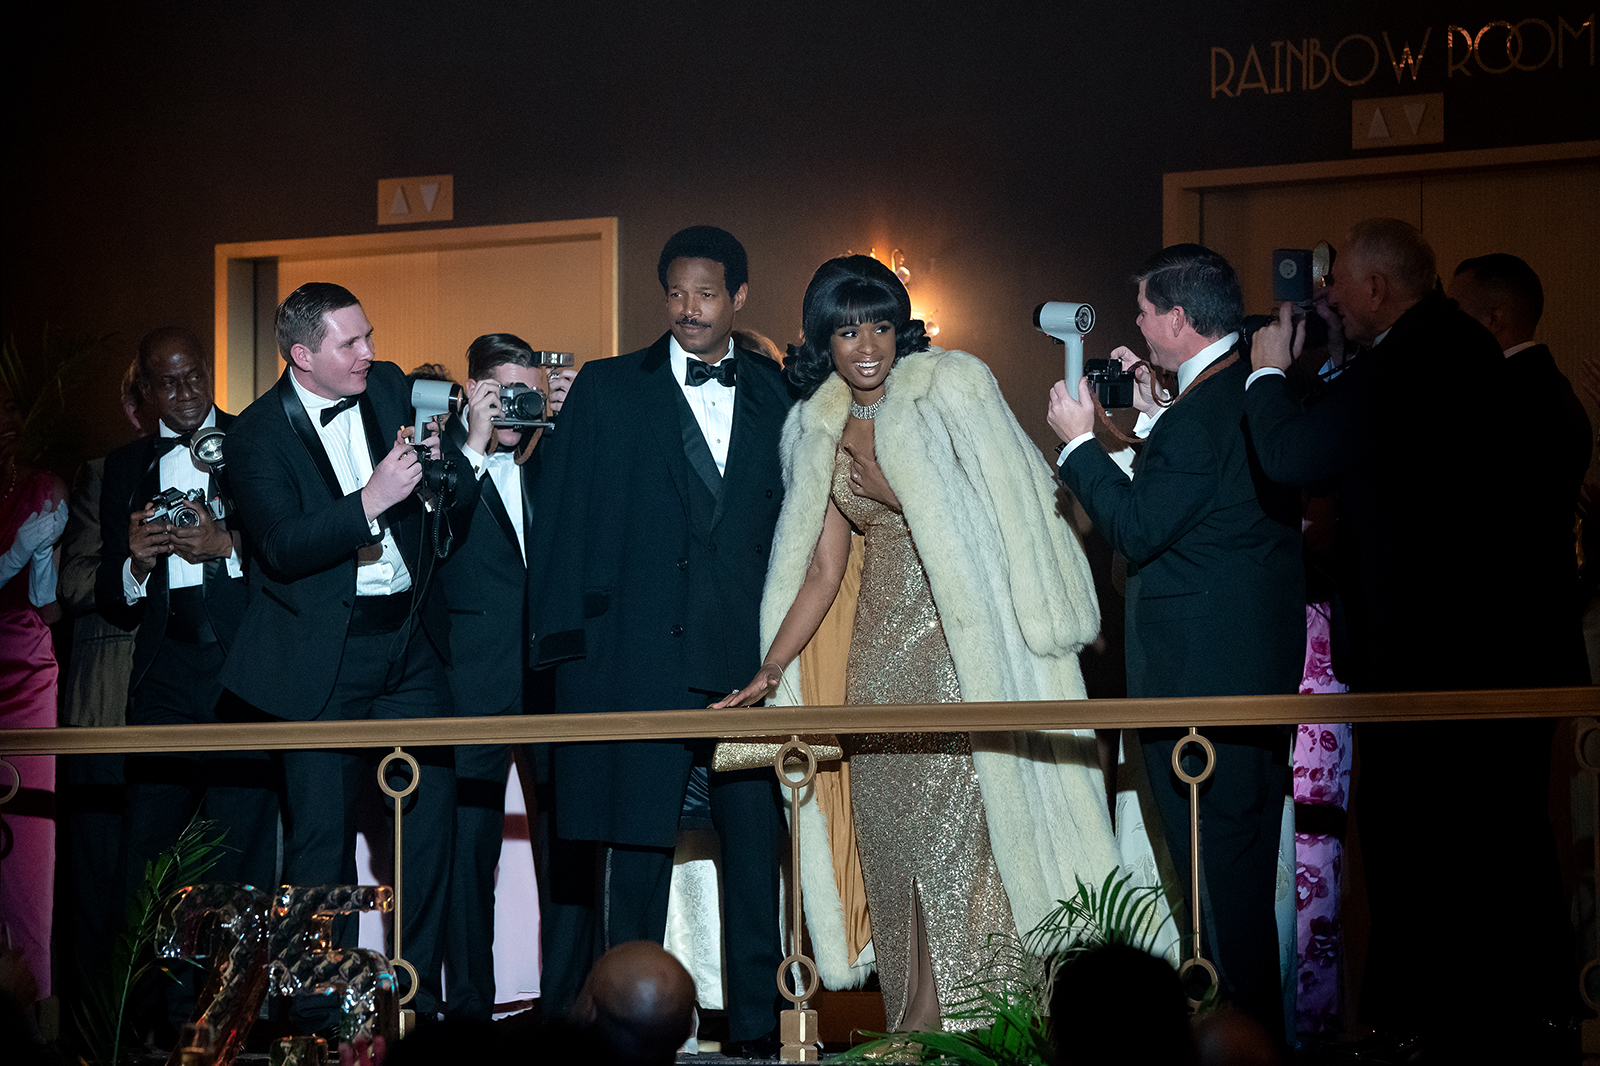 Marlon Wayans, center left, stars as Ted White and Jennifer Hudson, center right, as Aretha Franklin in “Respect,” a Metro Goldwyn Mayer Pictures film. Photo by Quantrell D. Colbert